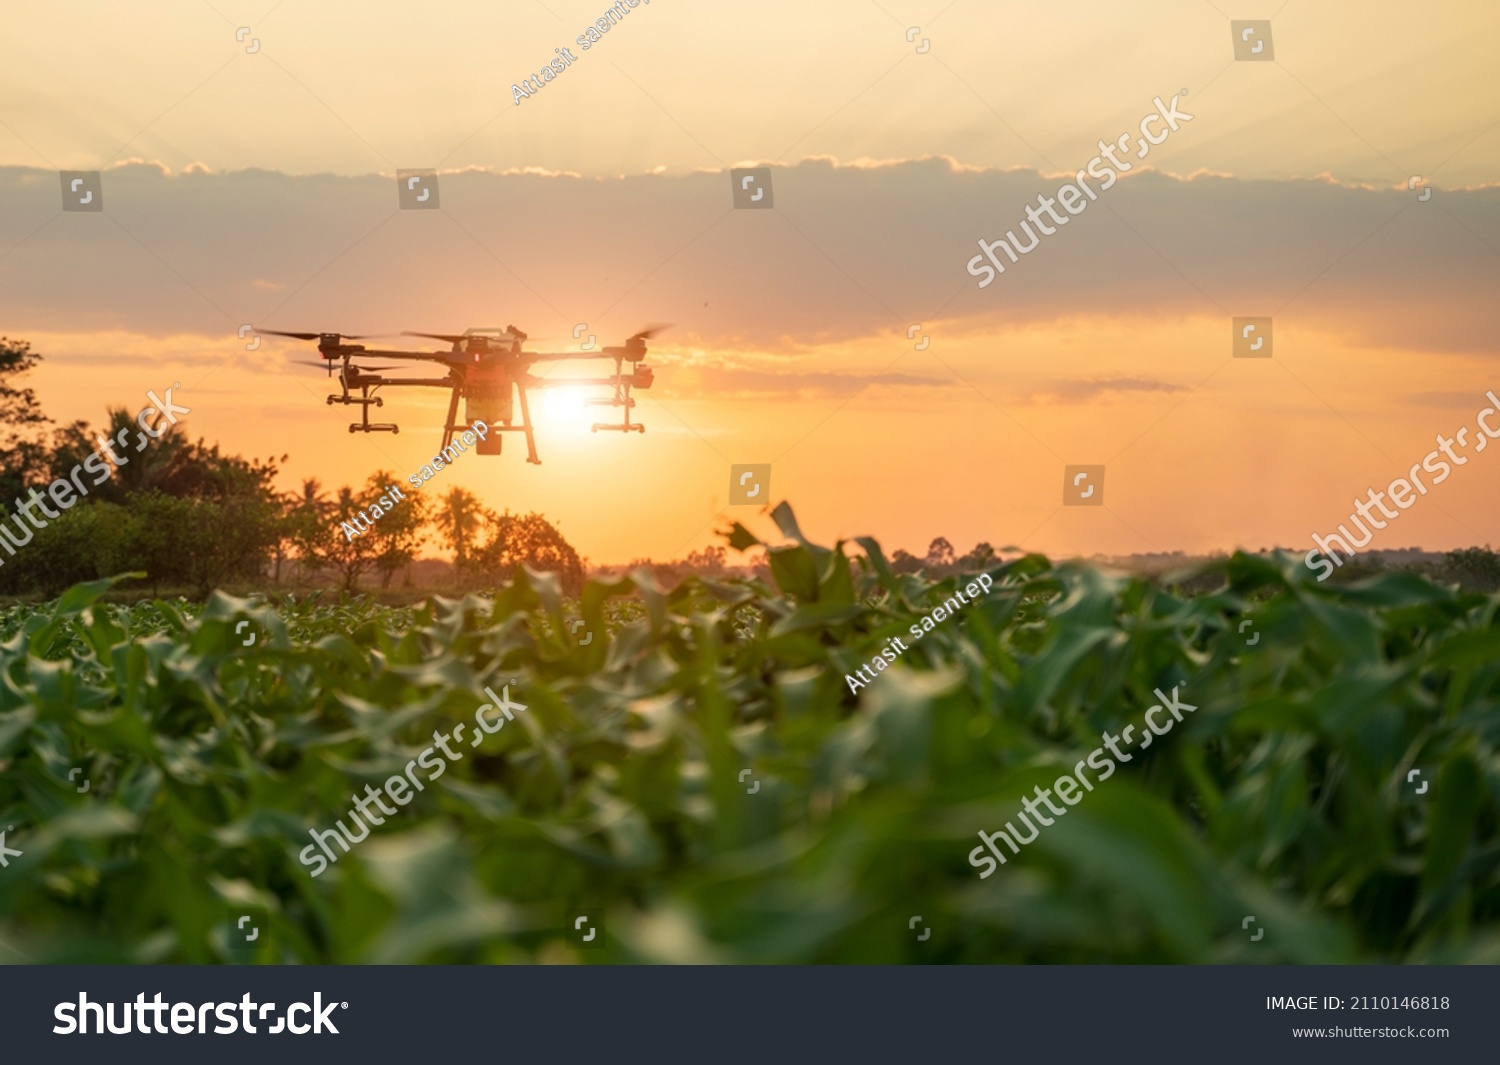 Agriculture drone fly to sprayed fertilizer water or holmone on the sweet corn fields .Agriculture technology drones modern farming tools of croppers. #2110146818